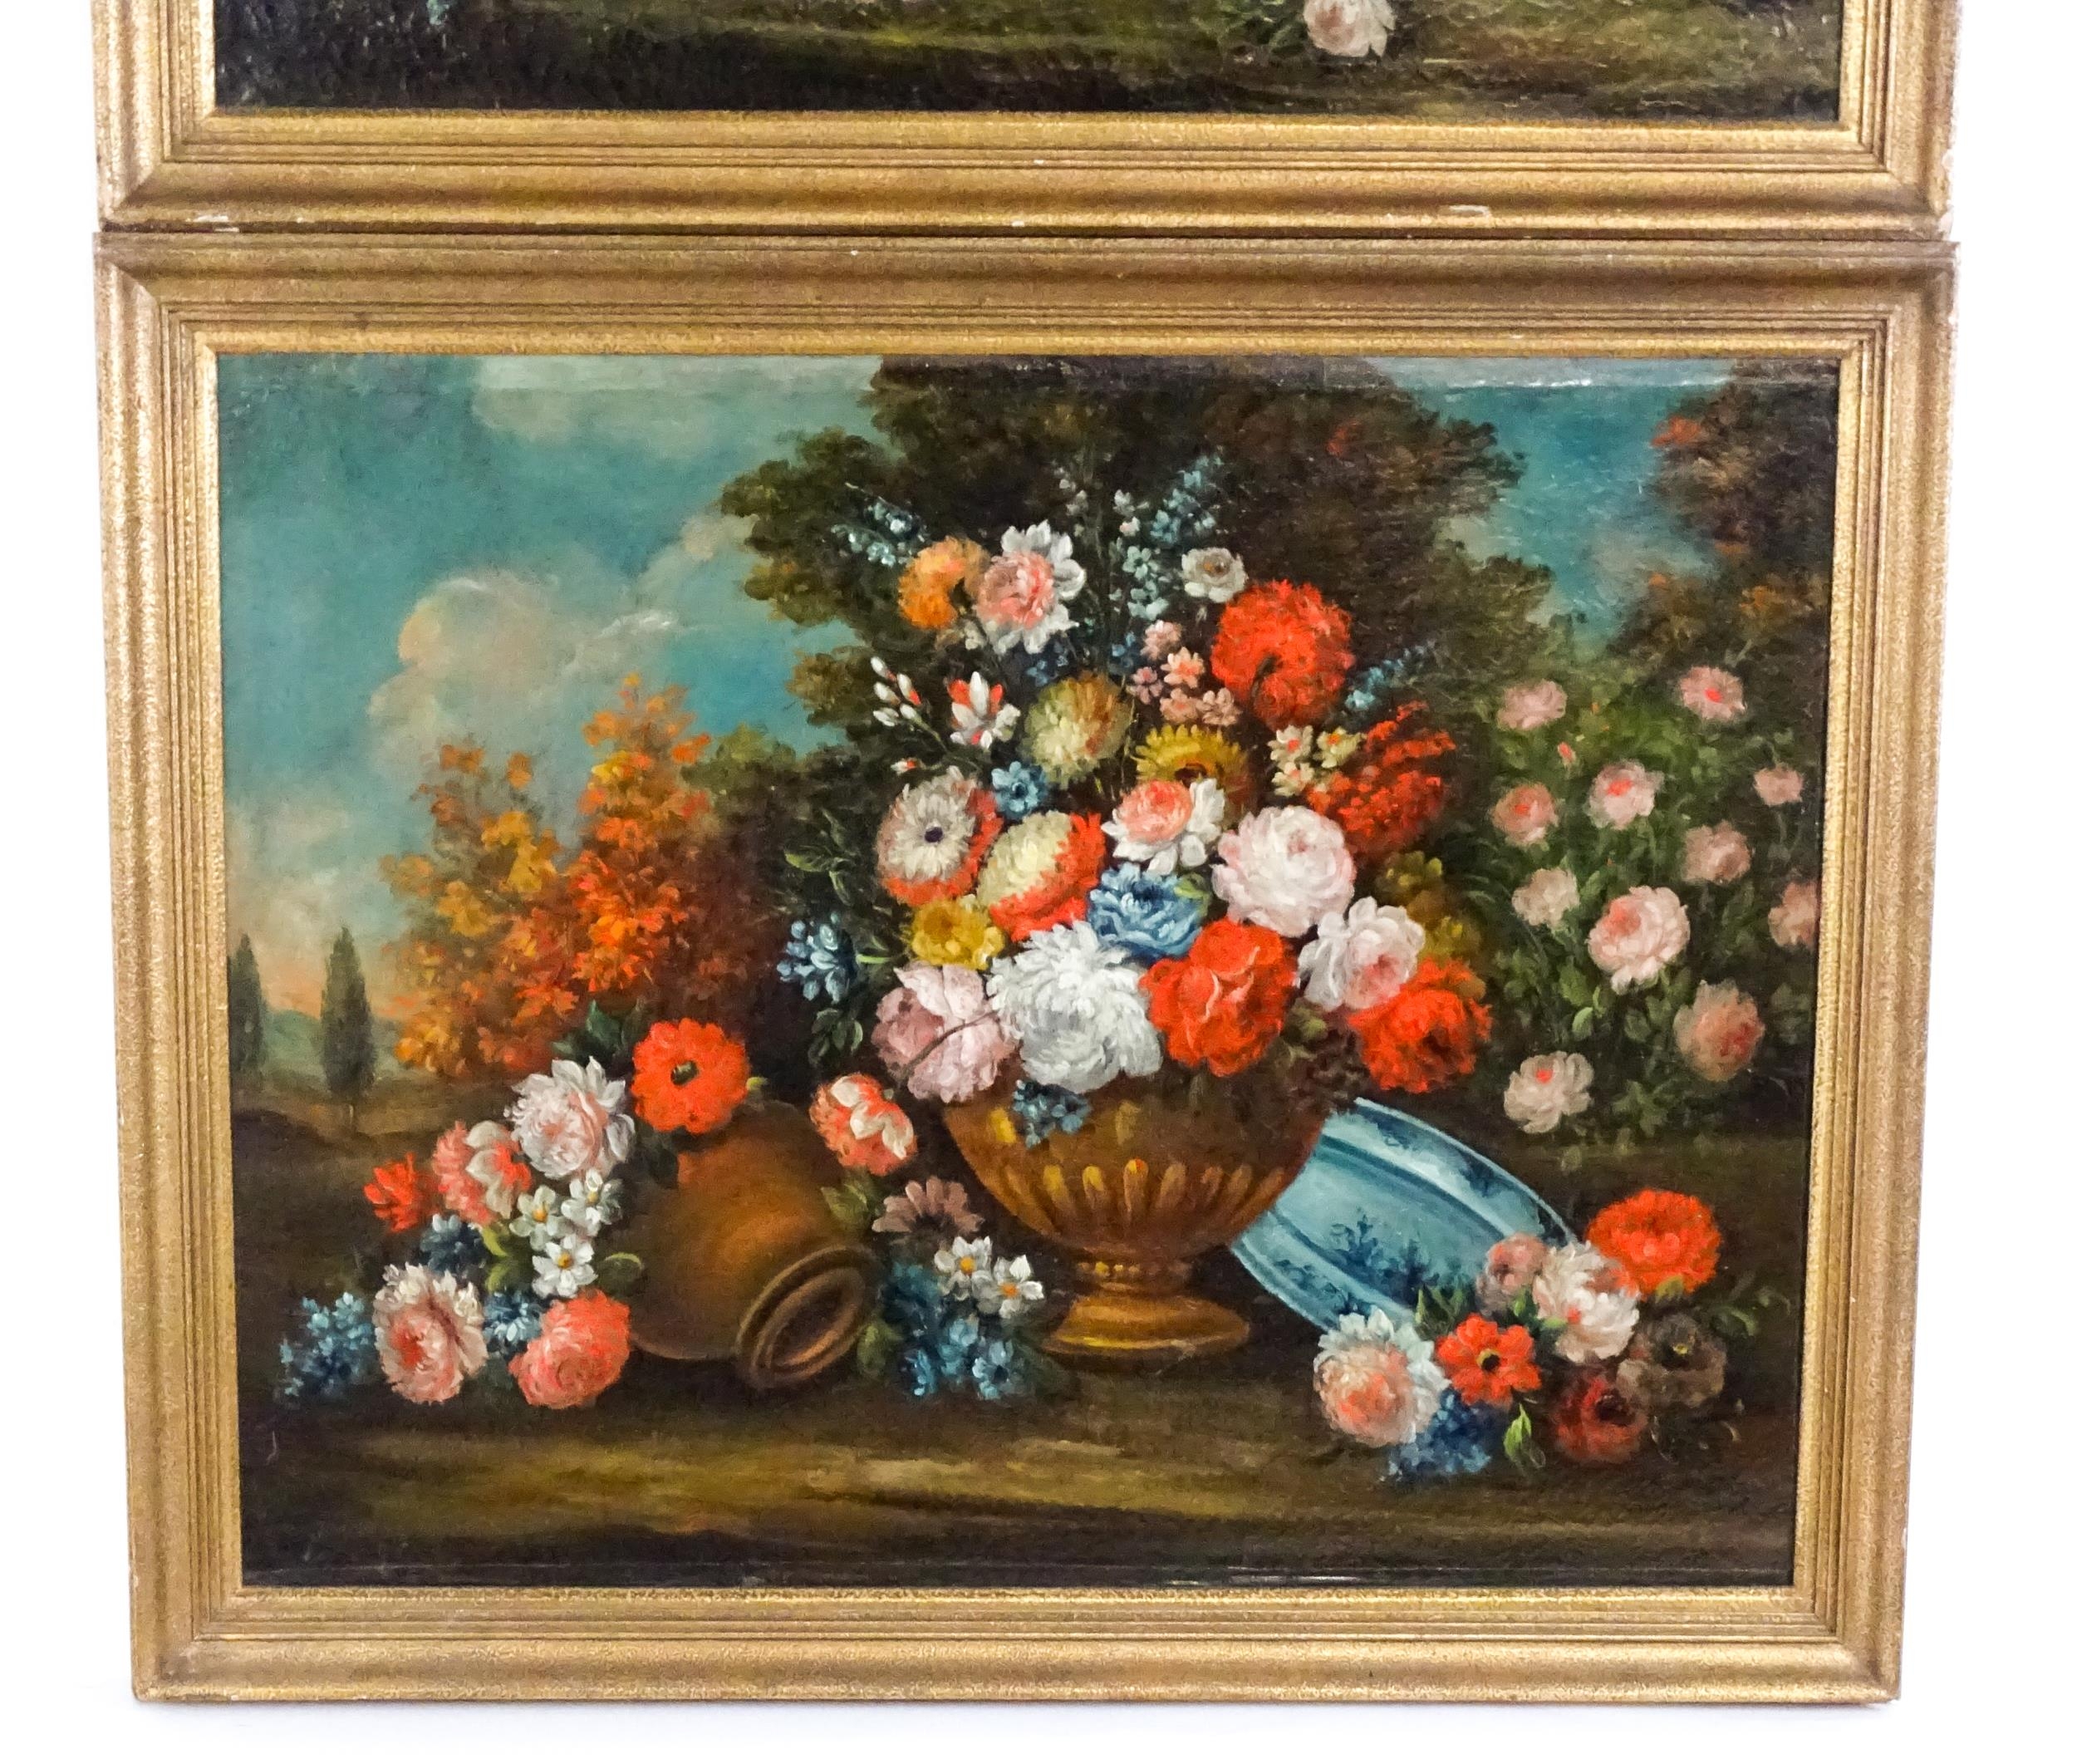 19th century, Oil on canvas, Two still life studies with blooming flowers in urn style vases and - Image 3 of 4